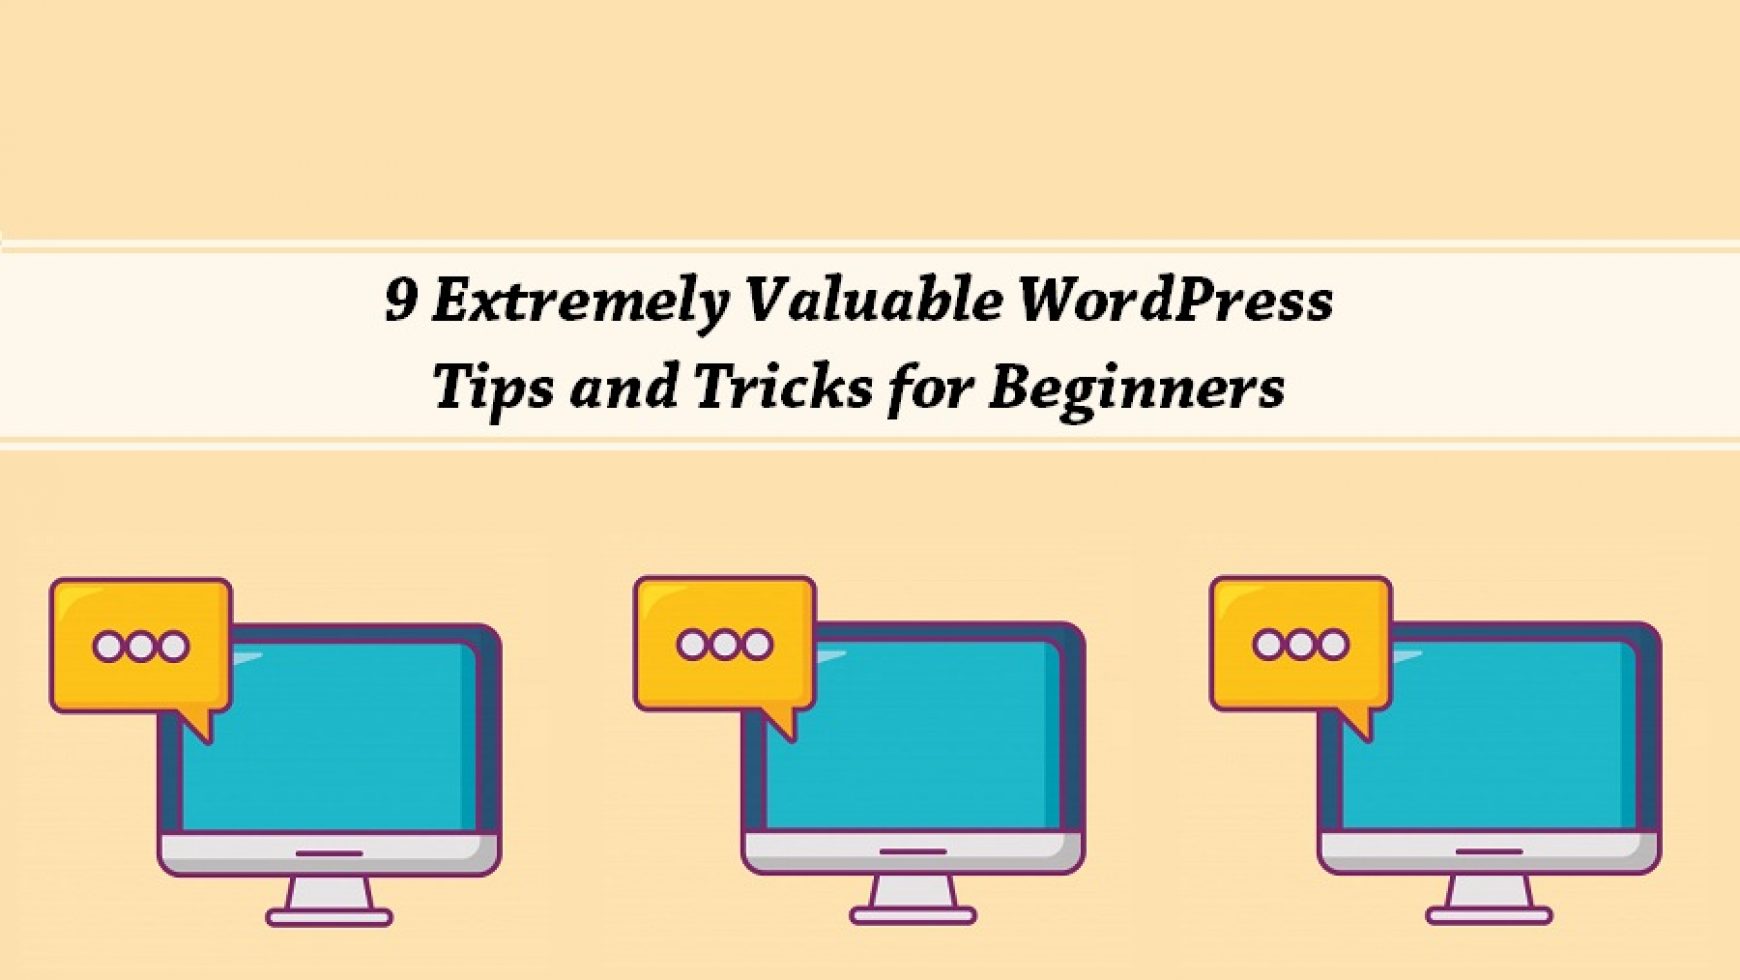 9 Extremely Valuable WordPress Tips and Tricks for Beginners